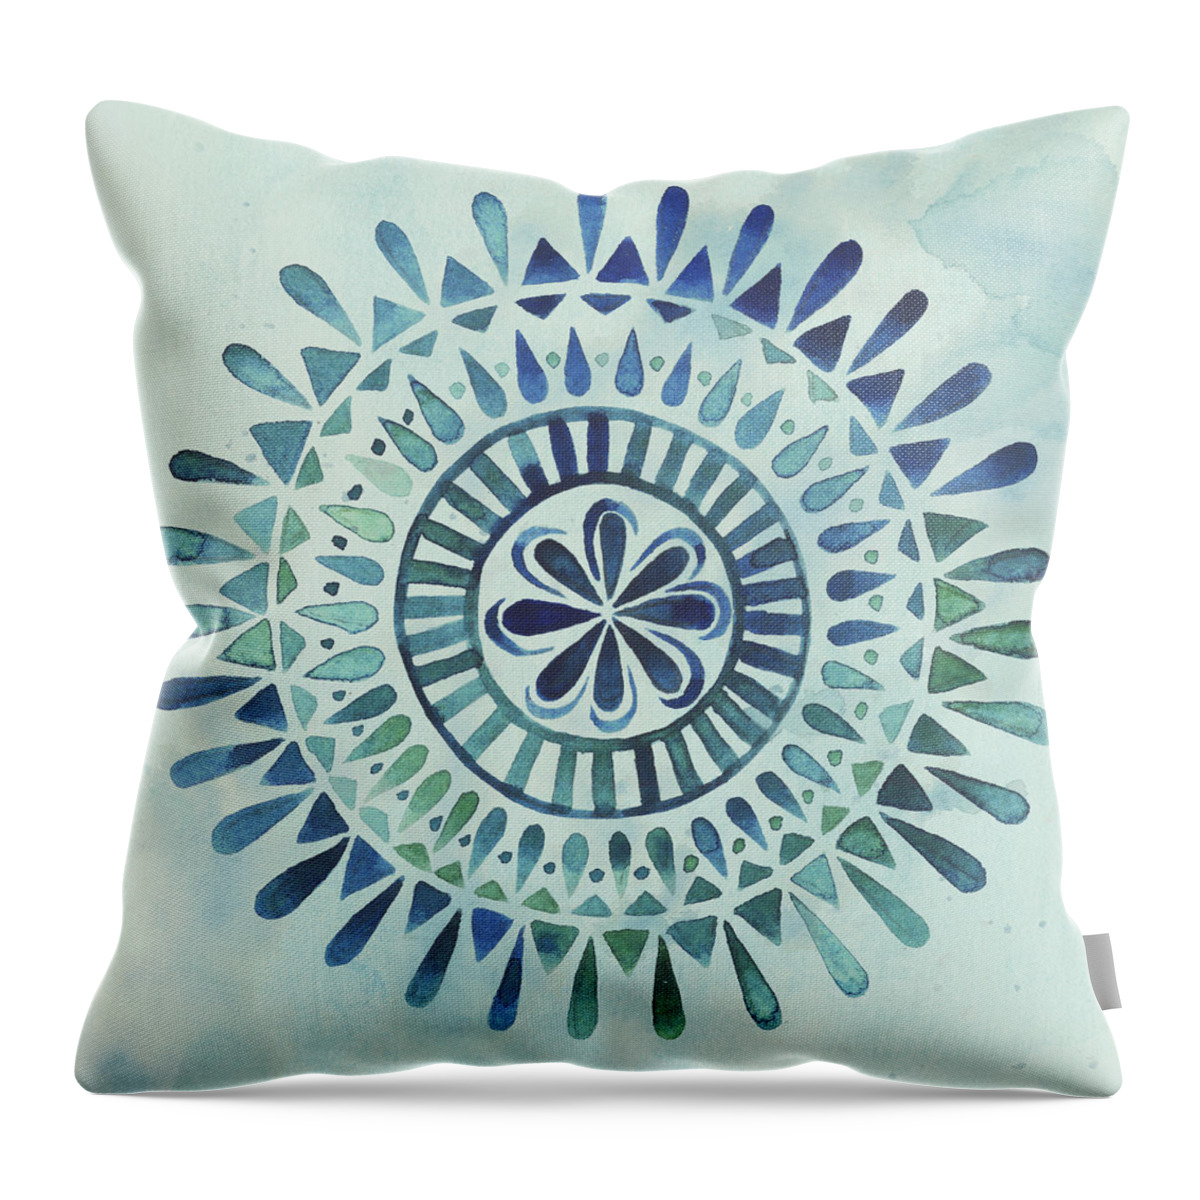 Decorative Throw Pillow featuring the painting Watercolor Mandala II by Grace Popp